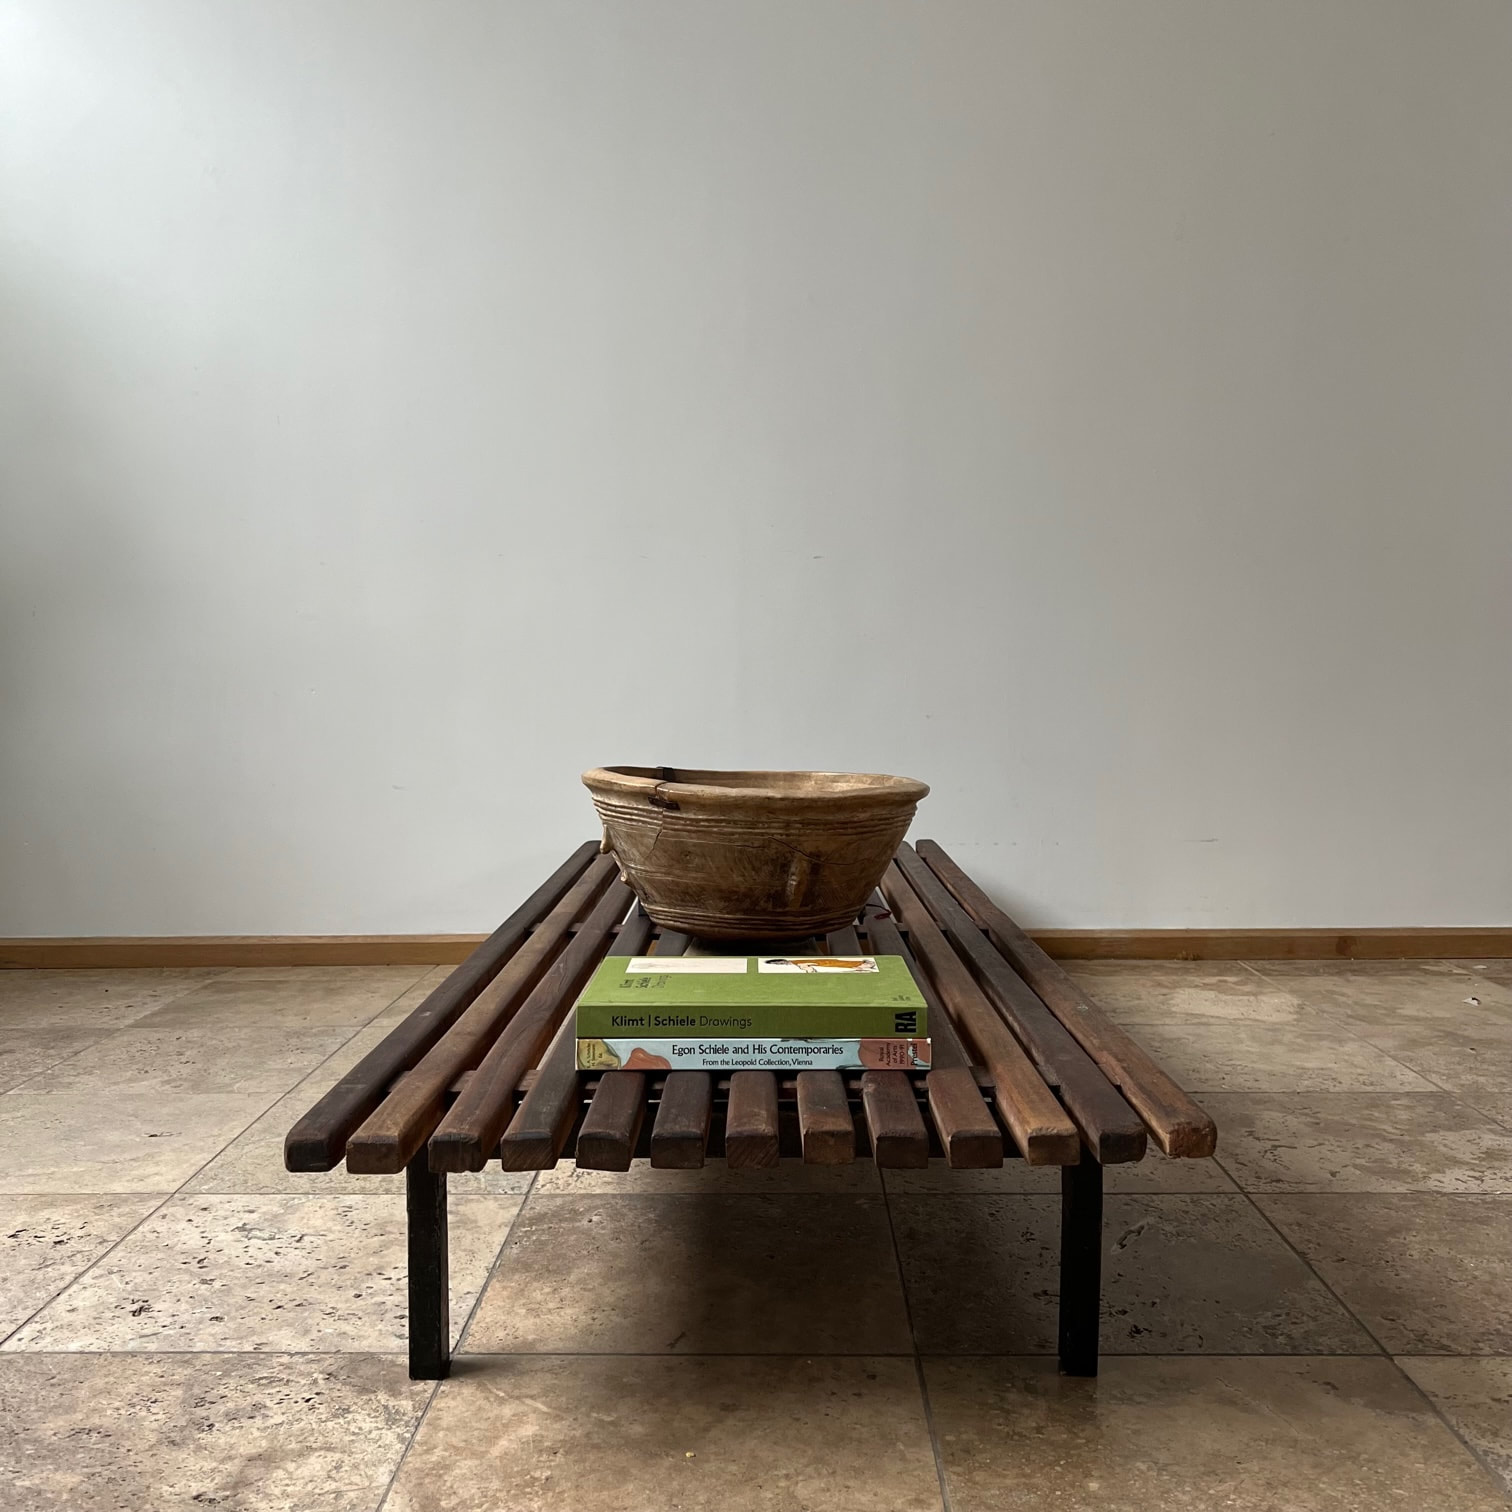 Sold at Auction: Charlotte Perriand, Charlotte Perriand, Steph Simon, Bench  of Cité Cansado